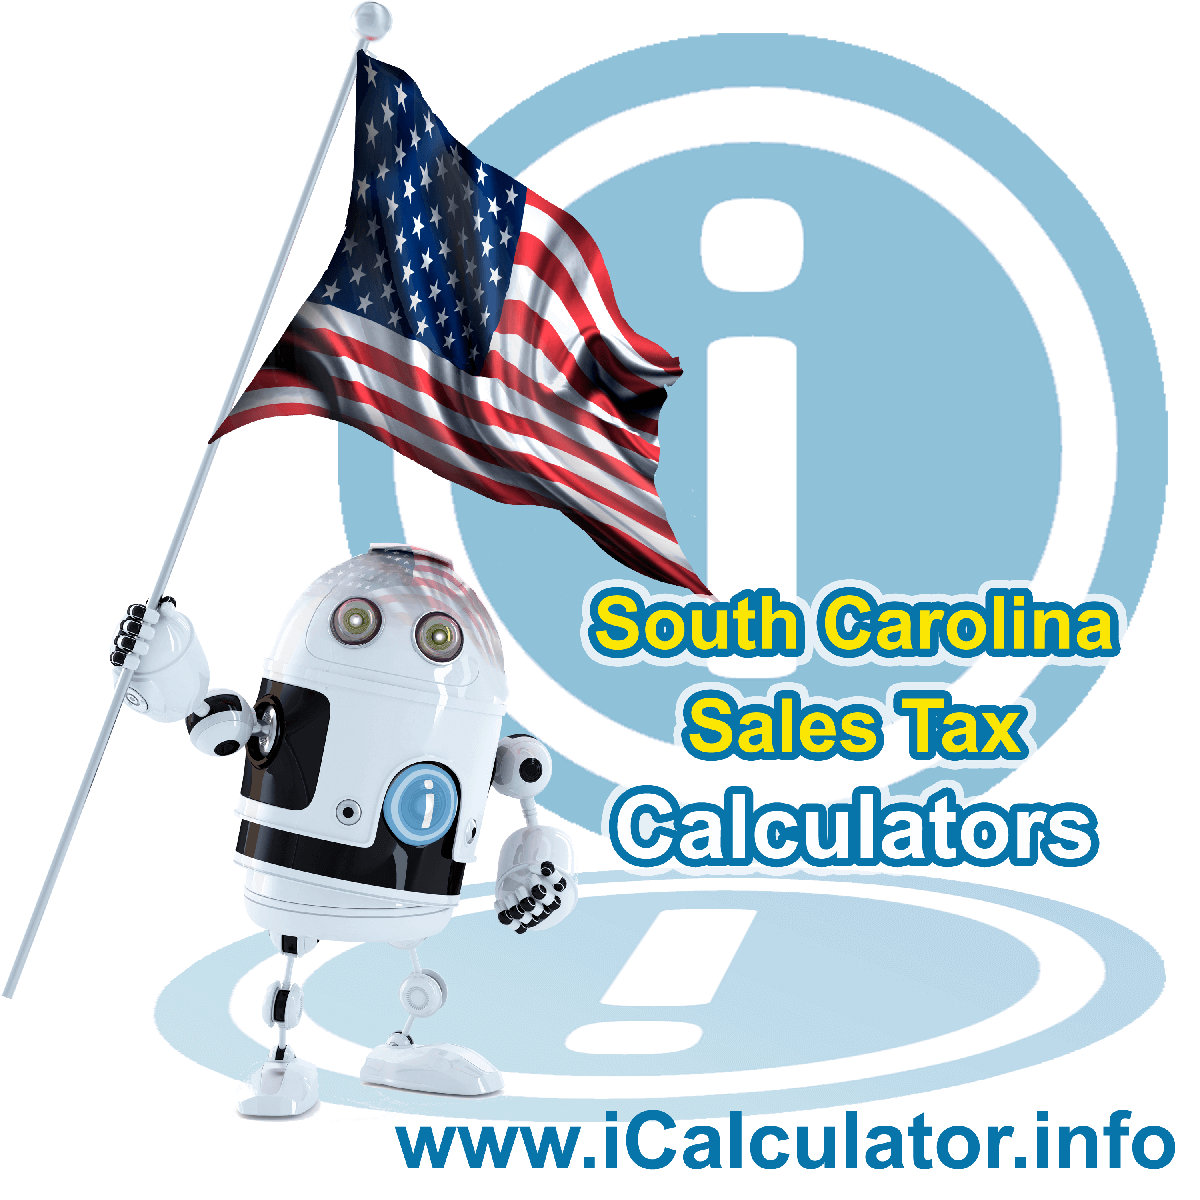 Greer Sales Rates: This image illustrates a calculator robot calculating Greer sales tax manually using the Greer Sales Tax Formula. You can use this information to calculate Greer Sales Tax manually or use the Greer Sales Tax Calculator to calculate sales tax online.